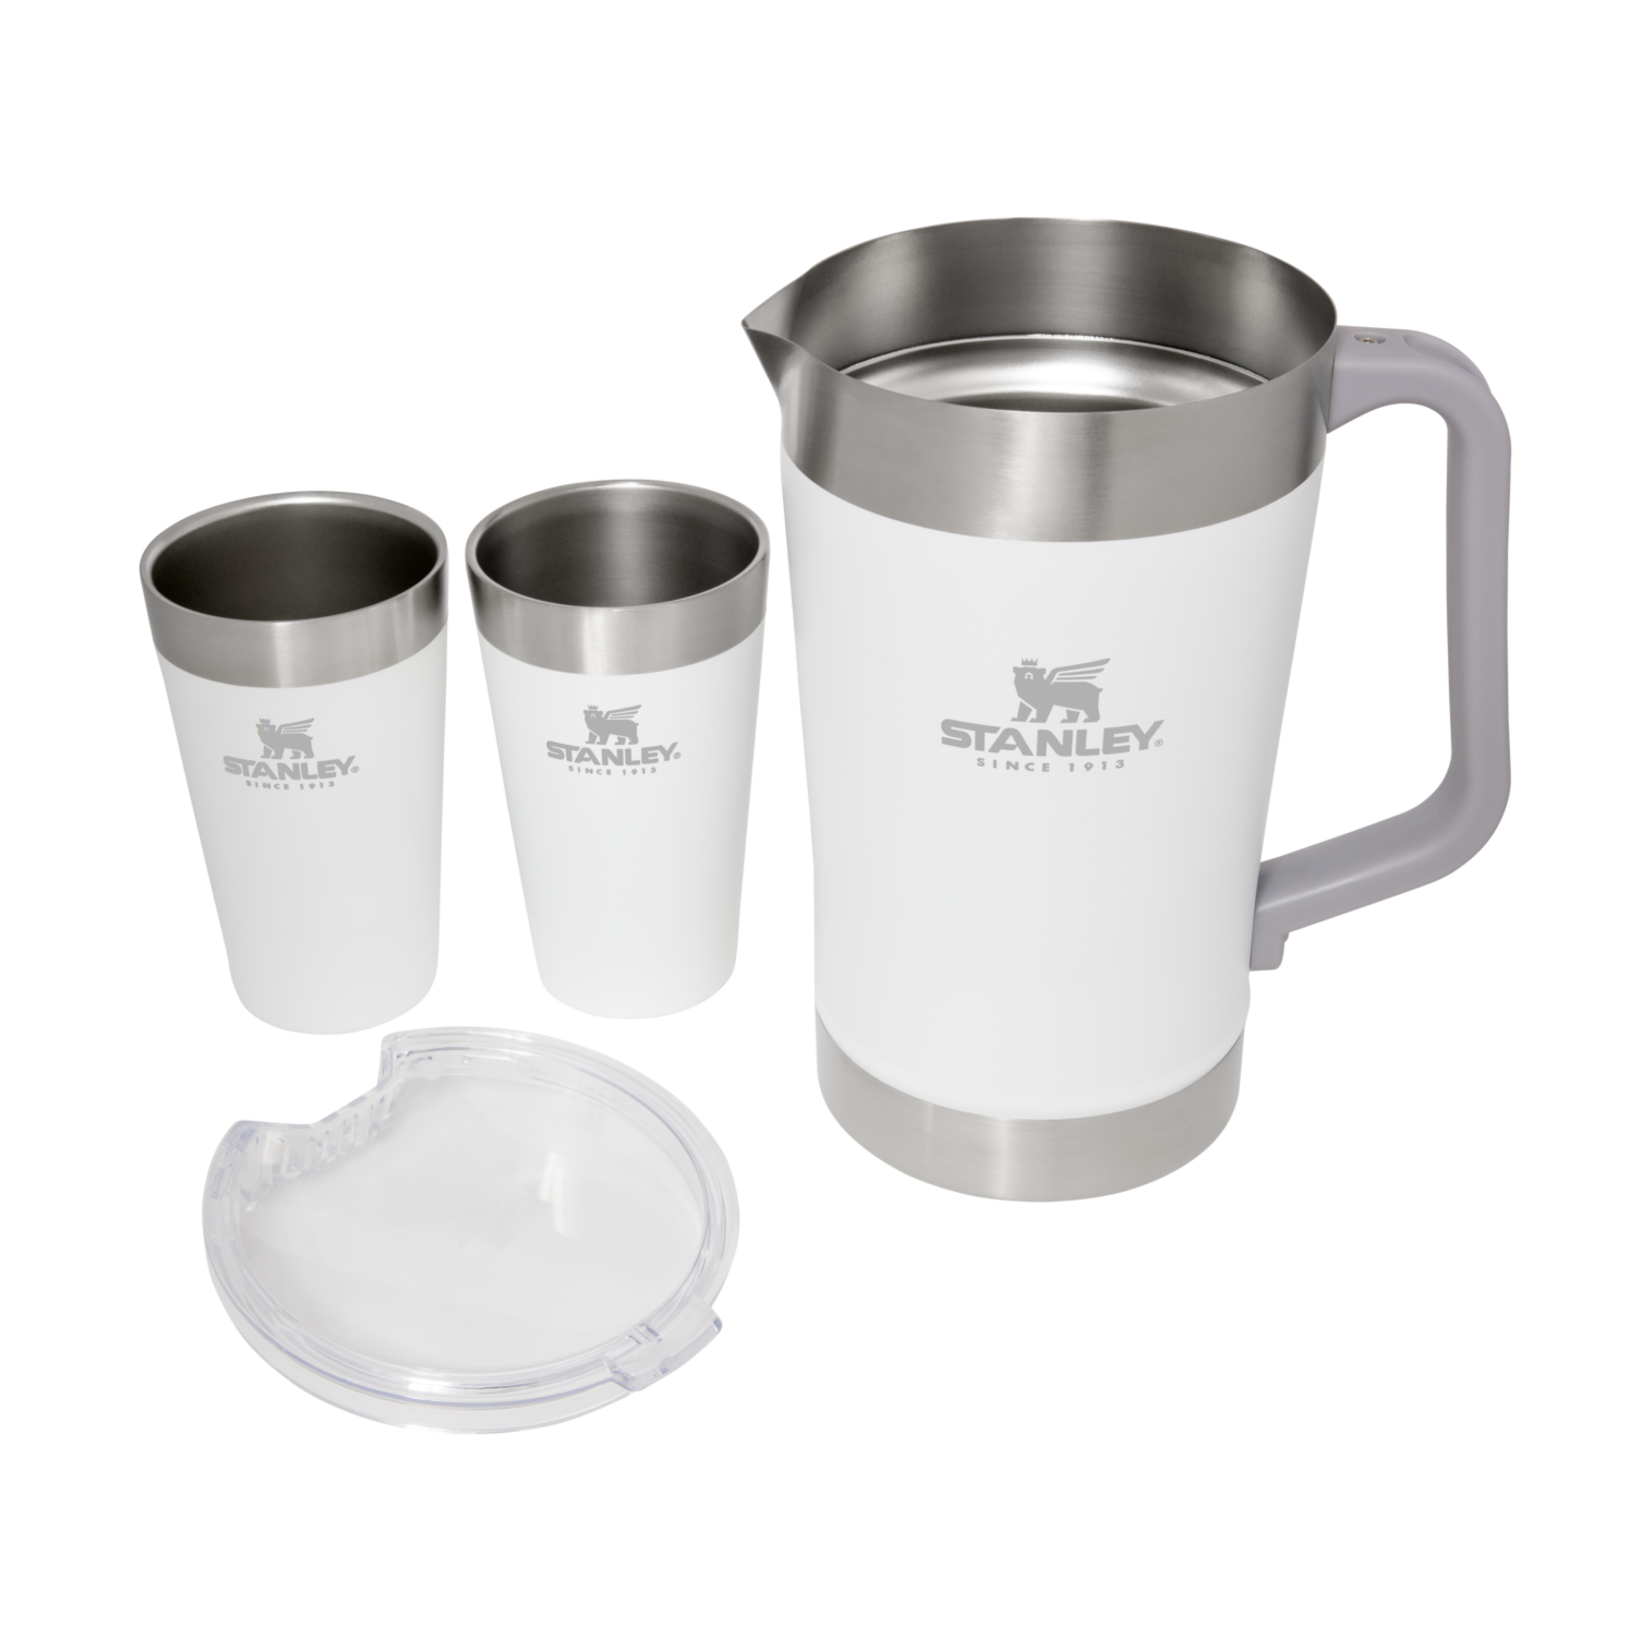 Stanley / The Stay-Chill Classic Pitcher Set